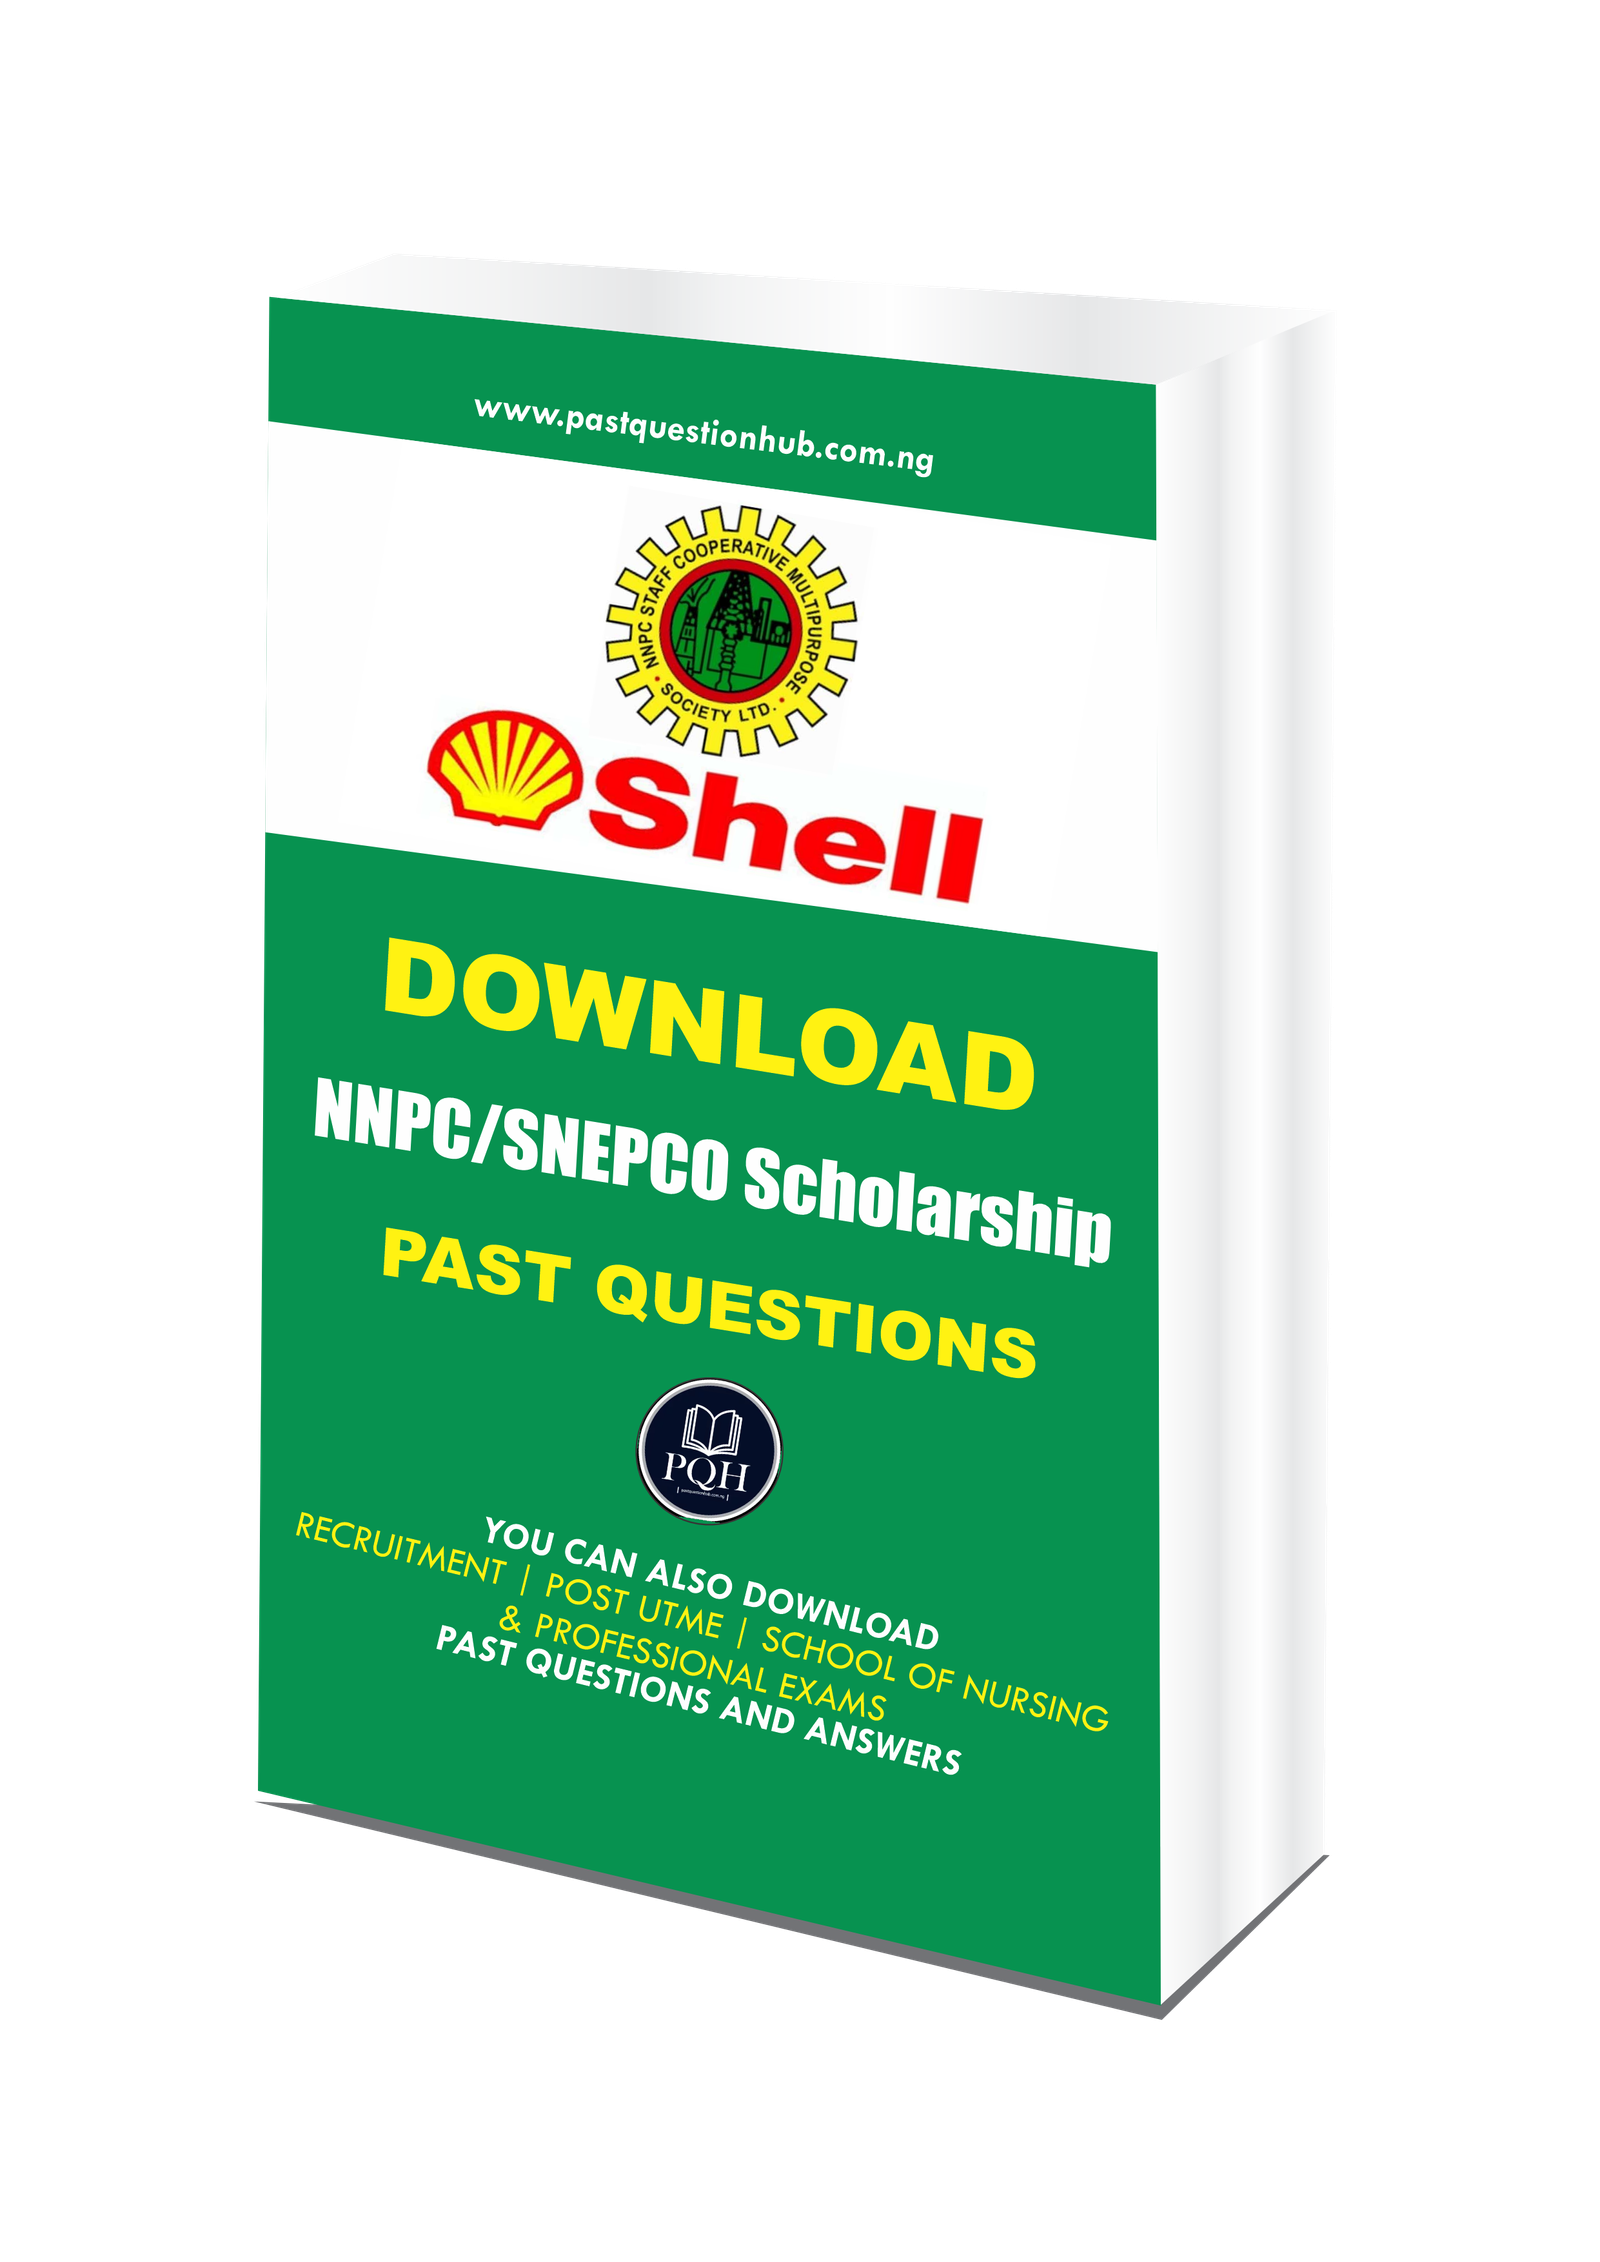 NNPC SNEPCO Scholarship Past Questions and Answers PDF